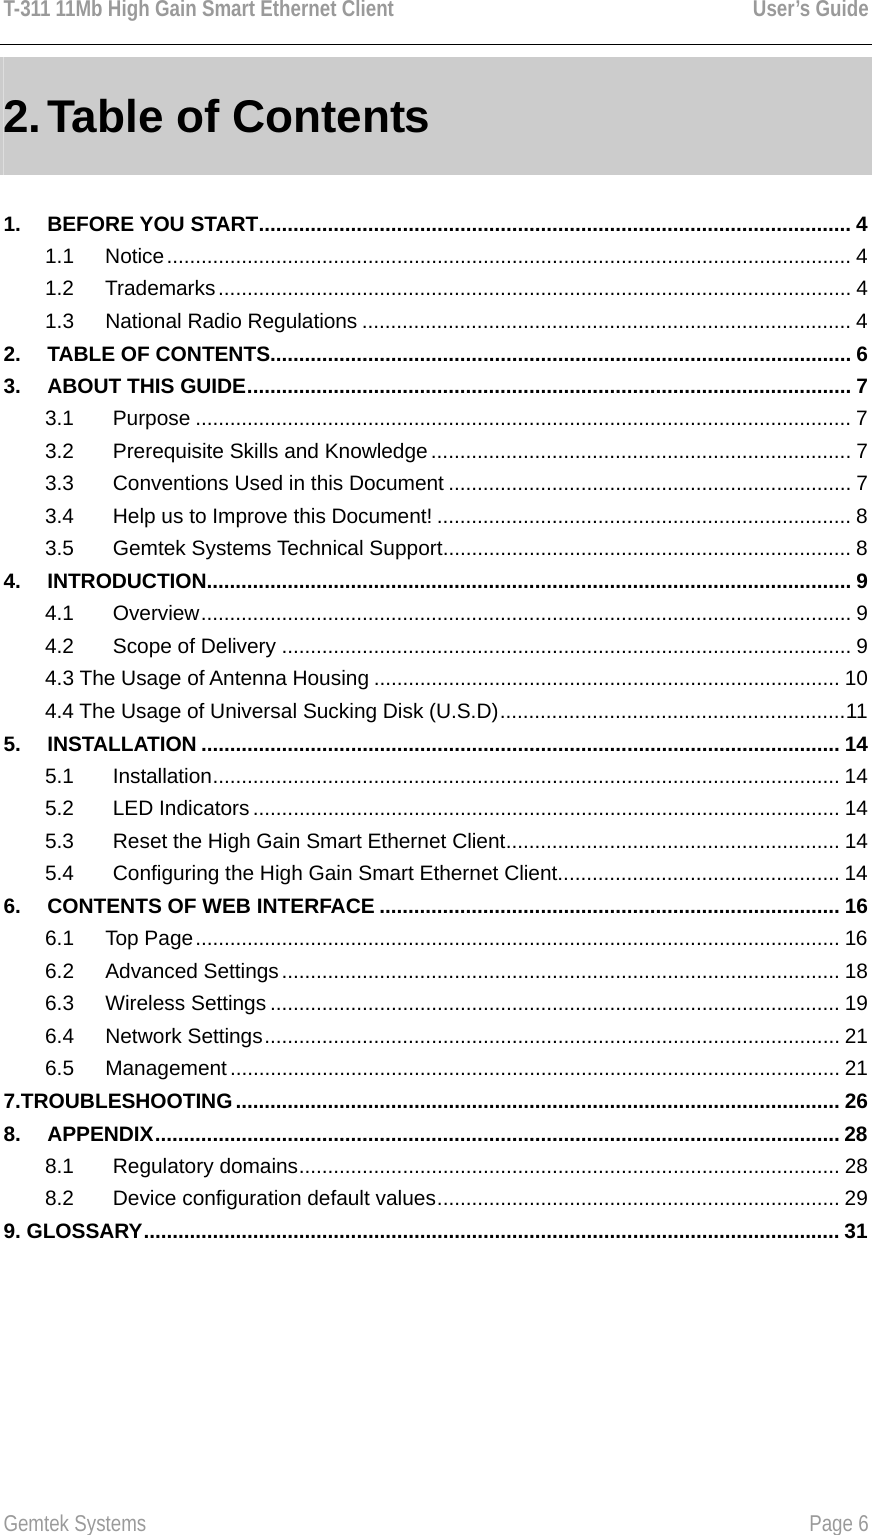 T-311 11Mb High Gain Smart Ethernet Client    User’s Guide  Gemtek Systems    Page 6  2. Table of Contents  1. BEFORE YOU START....................................................................................................... 4 1.1   Notice....................................................................................................................... 4 1.2   Trademarks.............................................................................................................. 4 1.3   National Radio Regulations ..................................................................................... 4 2. TABLE OF CONTENTS..................................................................................................... 6 3. ABOUT THIS GUIDE......................................................................................................... 7 3.1 Purpose .................................................................................................................. 7 3.2 Prerequisite Skills and Knowledge ......................................................................... 7 3.3 Conventions Used in this Document ...................................................................... 7 3.4 Help us to Improve this Document! ........................................................................ 8 3.5 Gemtek Systems Technical Support....................................................................... 8 4. INTRODUCTION................................................................................................................ 9 4.1 Overview................................................................................................................. 9 4.2 Scope of Delivery ................................................................................................... 9 4.3 The Usage of Antenna Housing ................................................................................. 10 4.4 The Usage of Universal Sucking Disk (U.S.D)............................................................11 5. INSTALLATION ............................................................................................................... 14 5.1 Installation............................................................................................................. 14 5.2 LED Indicators ...................................................................................................... 14 5.3 Reset the High Gain Smart Ethernet Client.......................................................... 14 5.4 Configuring the High Gain Smart Ethernet Client................................................. 14 6. CONTENTS OF WEB INTERFACE ................................................................................ 16 6.1   Top Page................................................................................................................ 16 6.2   Advanced Settings................................................................................................. 18 6.3   Wireless Settings ................................................................................................... 19 6.4   Network Settings.................................................................................................... 21 6.5   Management.......................................................................................................... 21 7.TROUBLESHOOTING......................................................................................................... 26 8. APPENDIX....................................................................................................................... 28 8.1 Regulatory domains.............................................................................................. 28 8.2 Device configuration default values...................................................................... 29 9. GLOSSARY......................................................................................................................... 31 